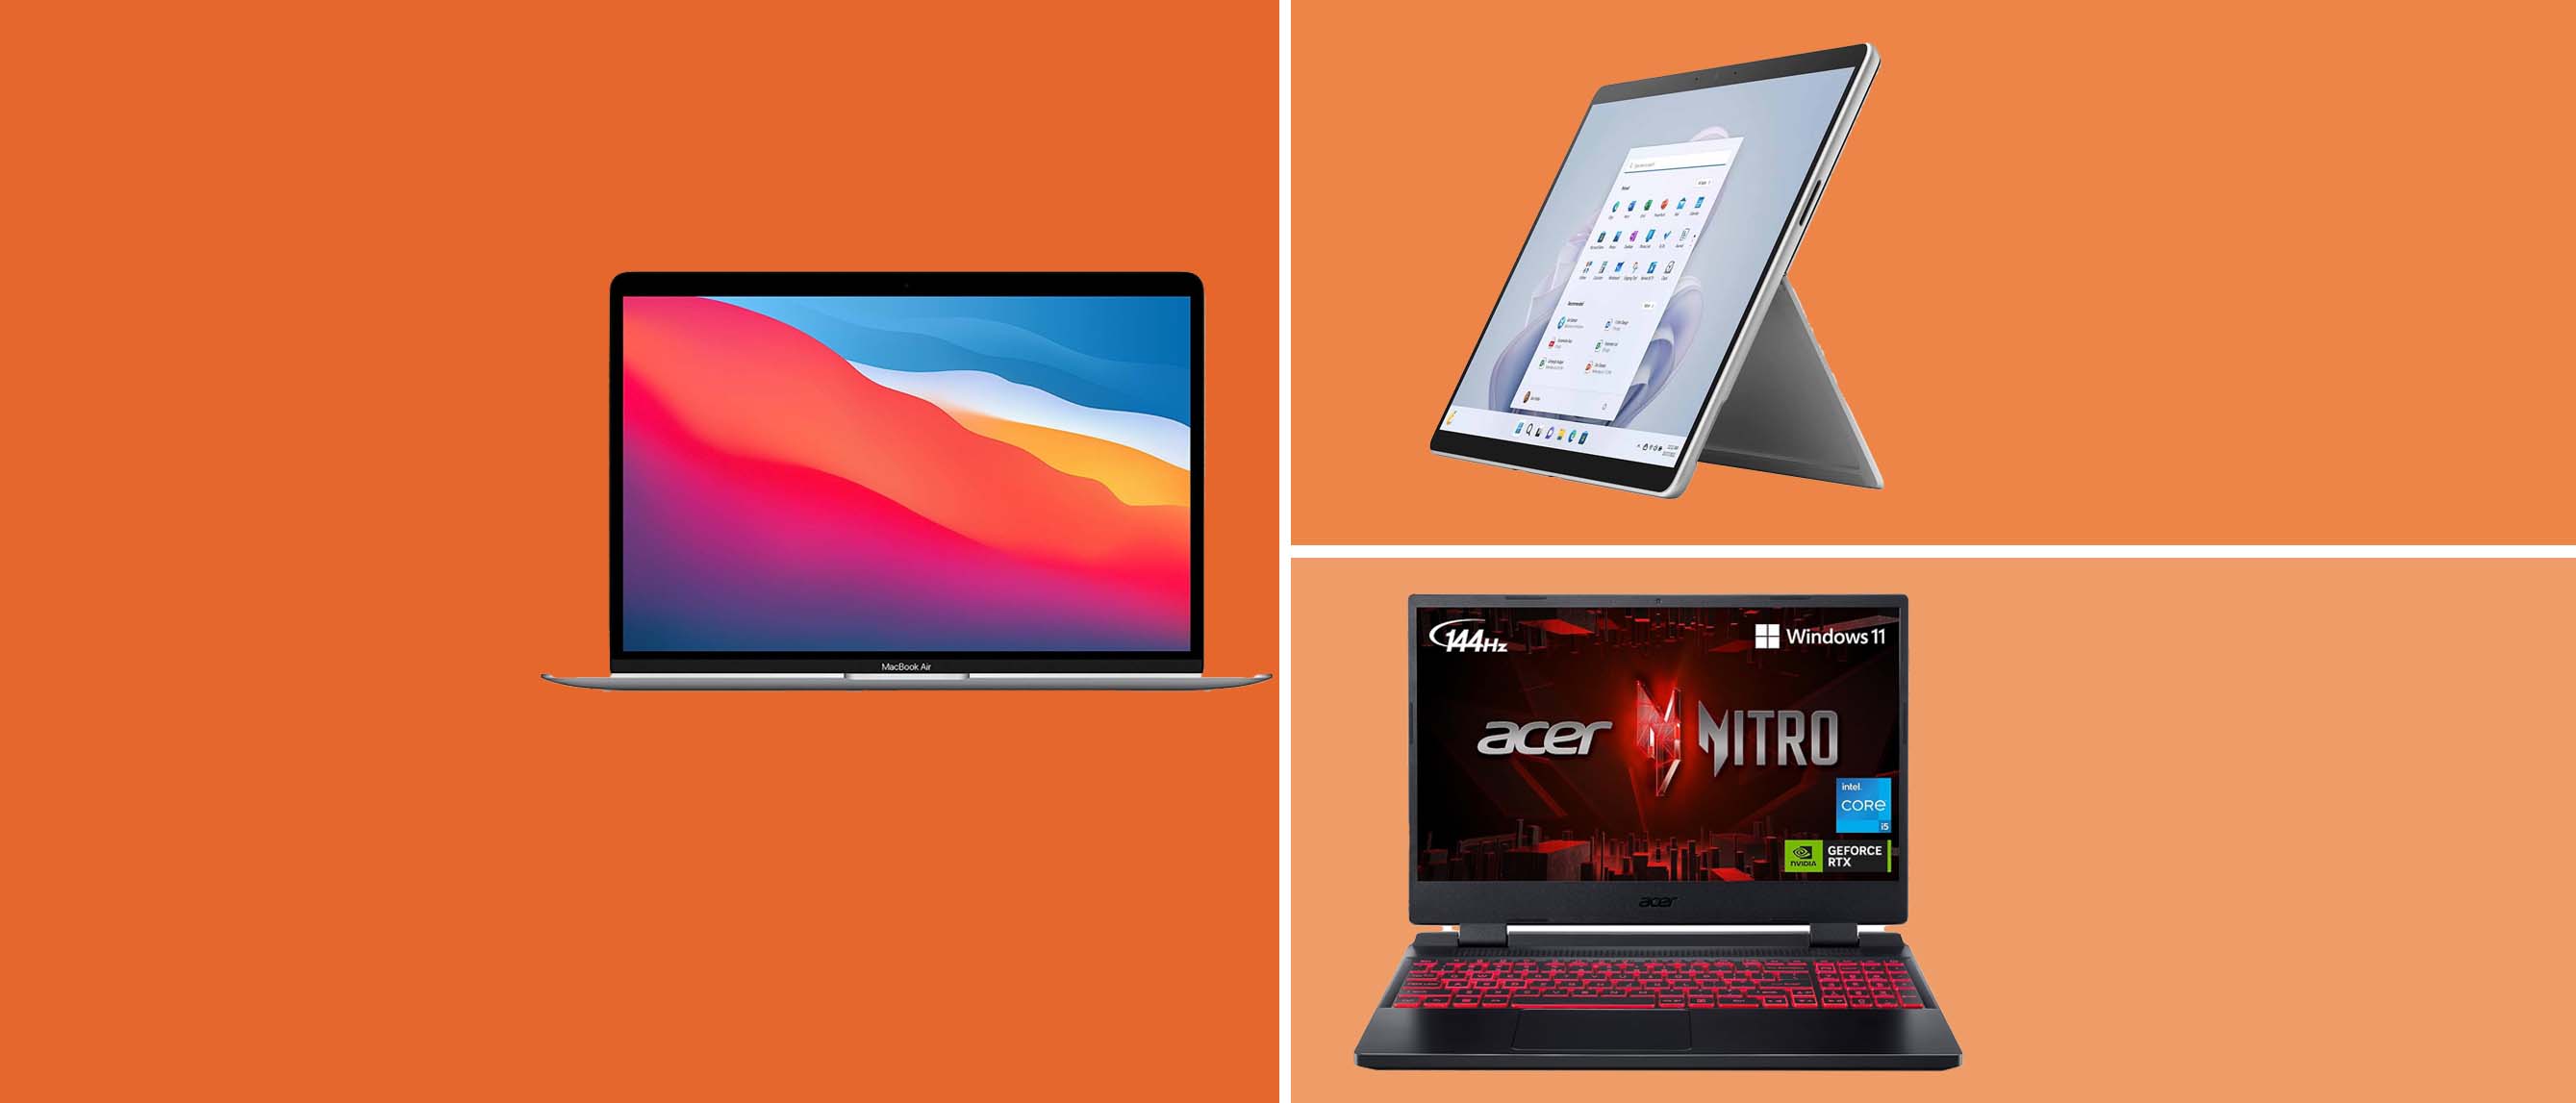 three of the best laptops on sale this prime day including Apple Macbook, Acer nitro and Microsoft 